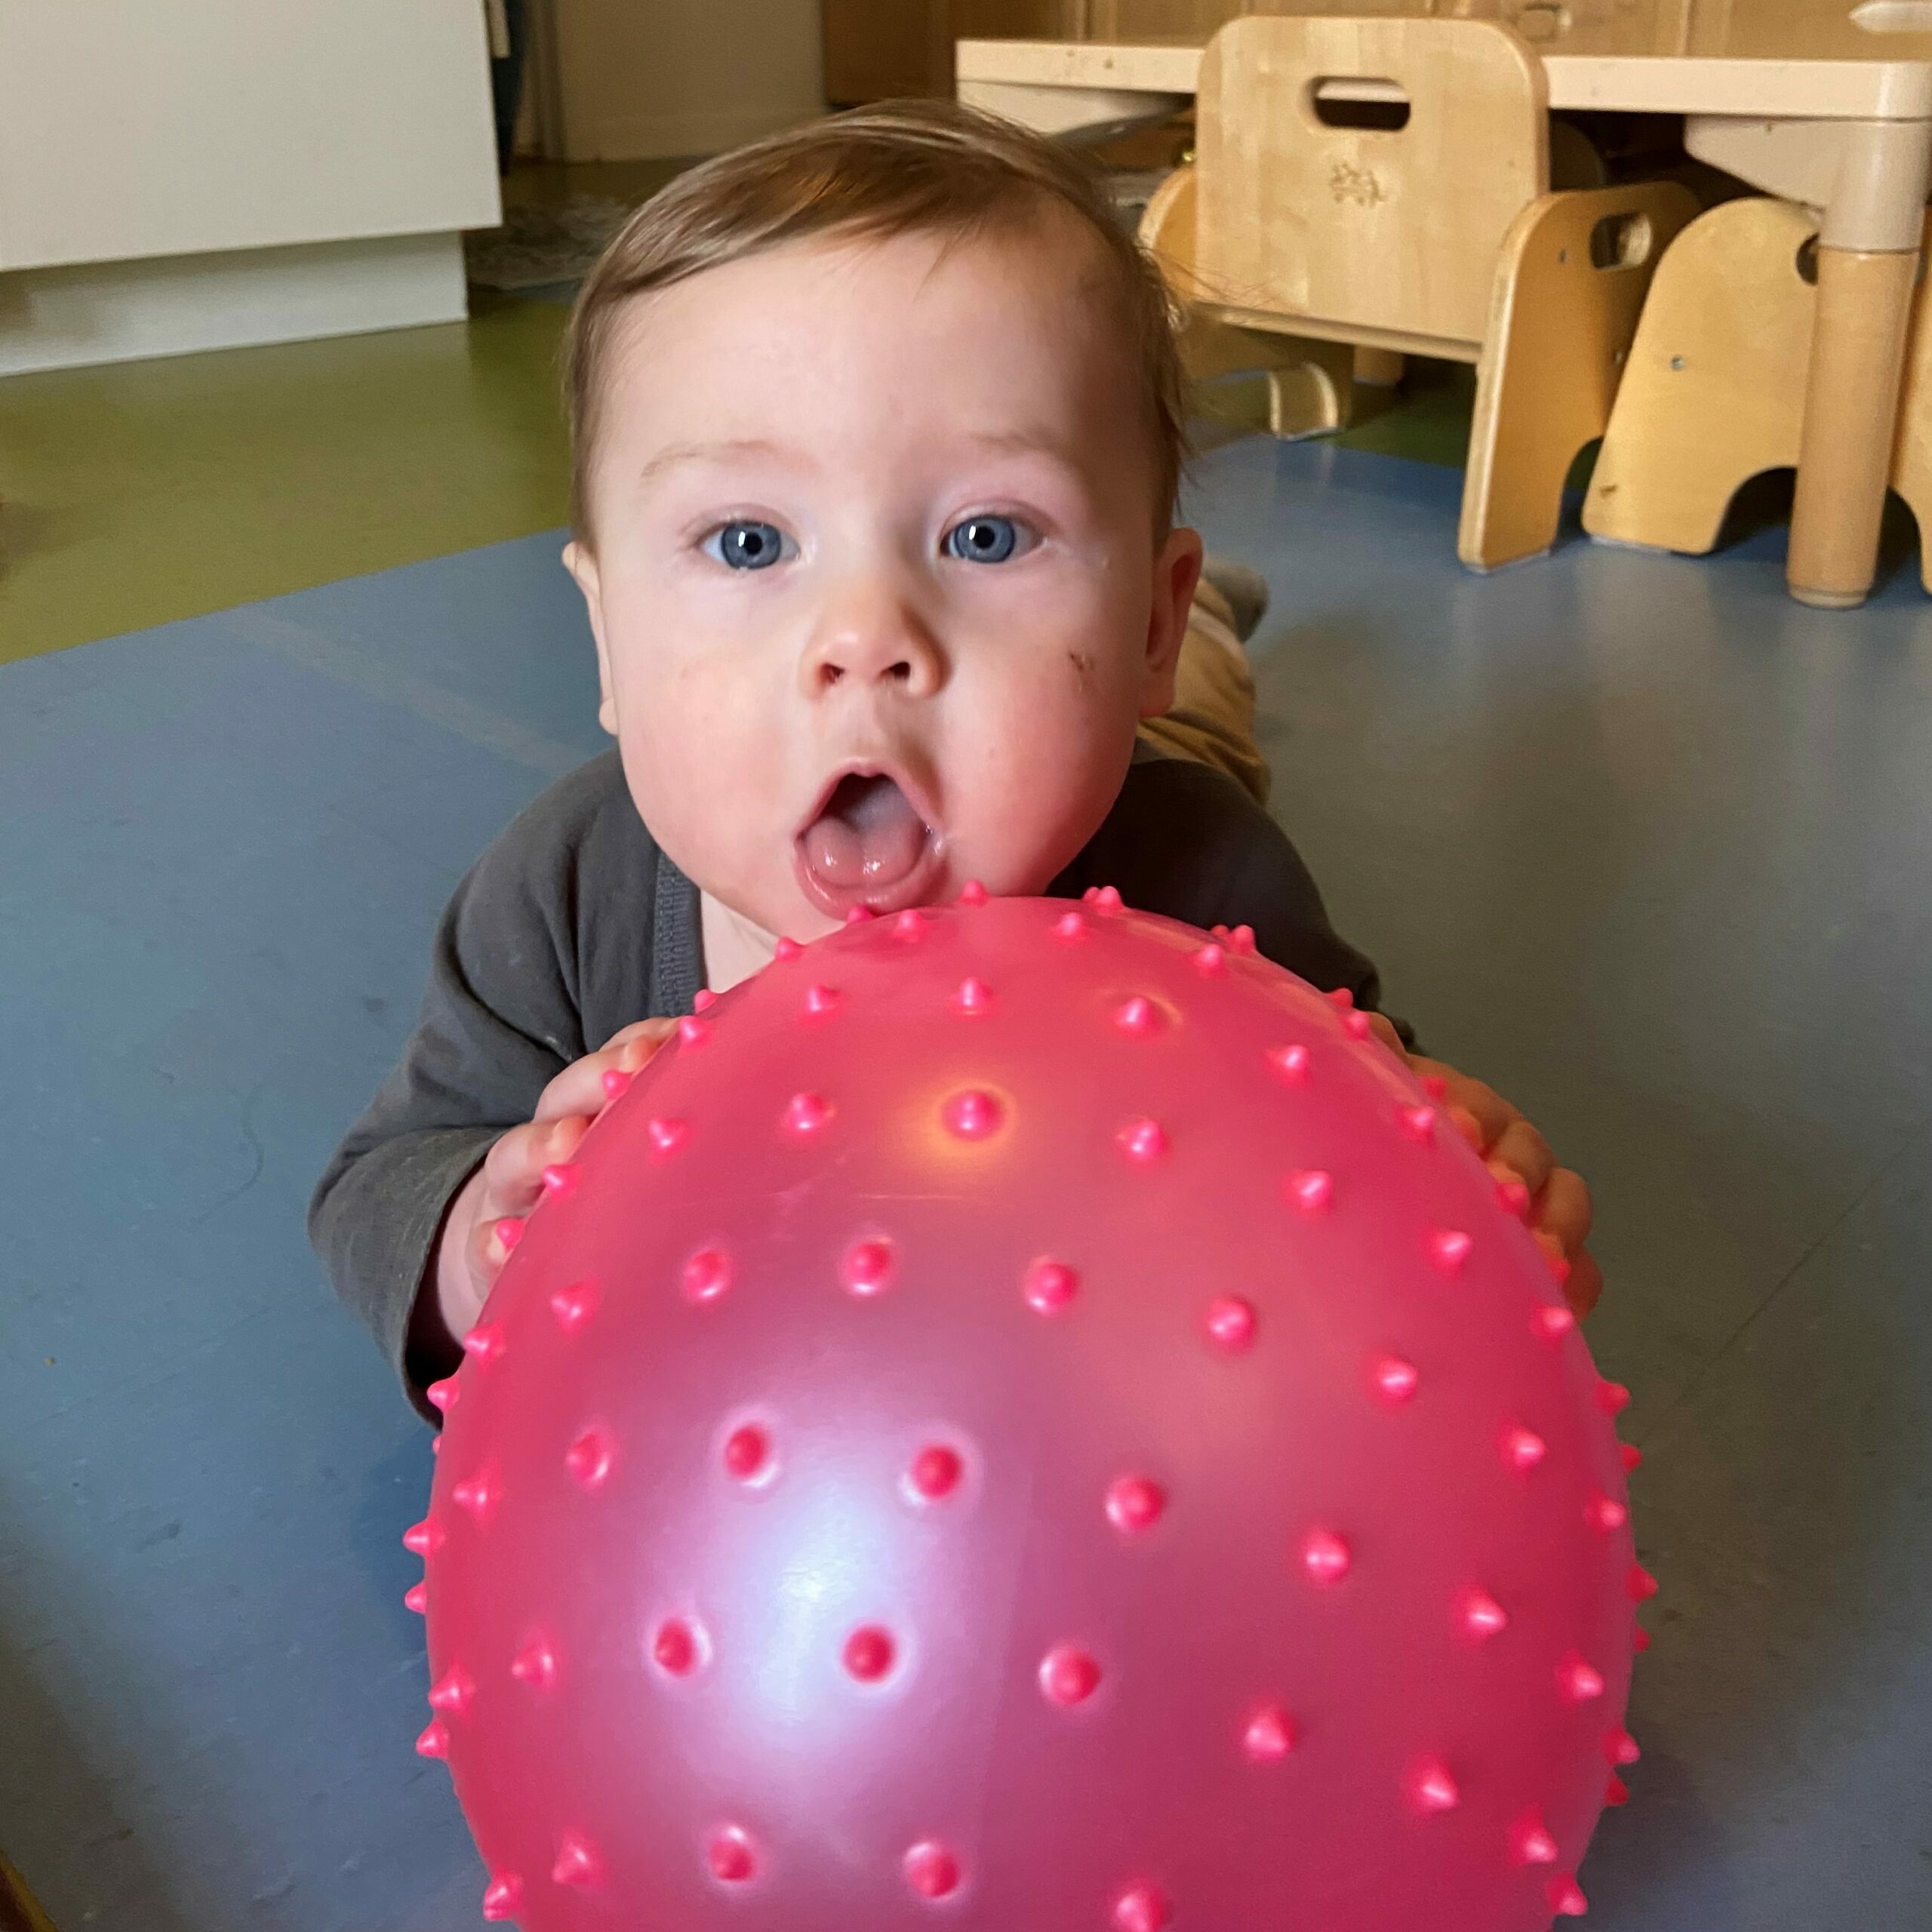 Infant grabs a pink/red ball and sticks tongue out, making focused eye contact